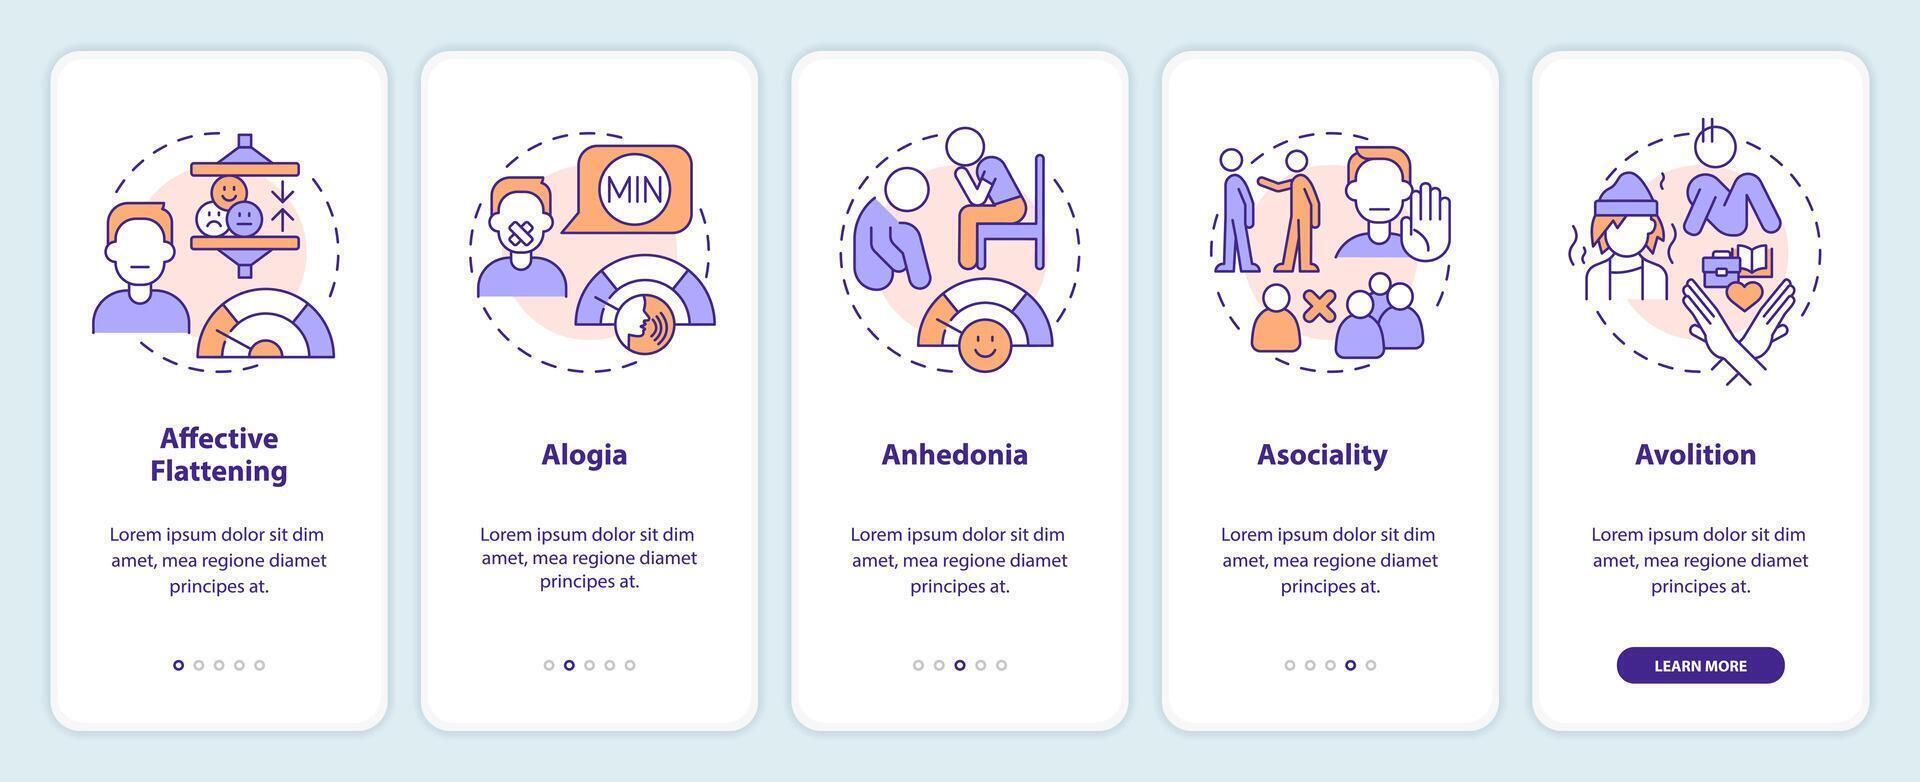 Schizophrenia negative symptoms onboarding mobile app screen. Walkthrough 5 steps editable graphic instructions with linear concepts. UI, UX, GUI template vector